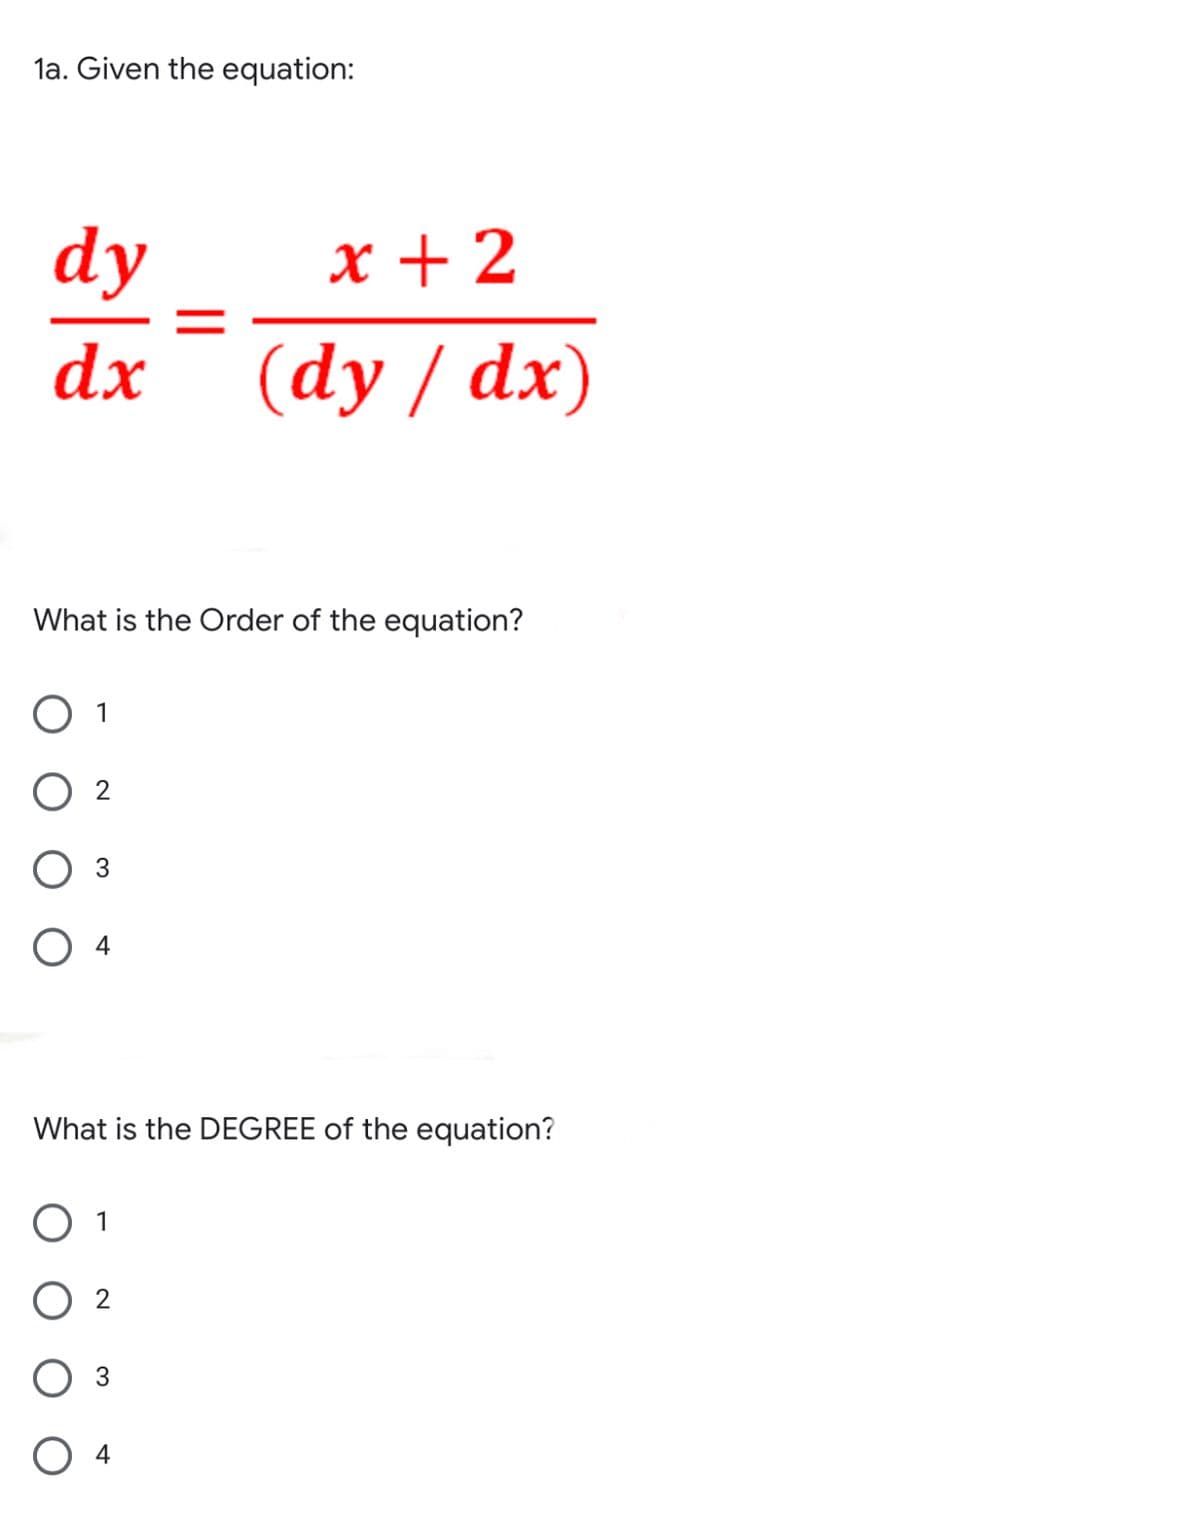 la. Given the equation:
dy
x + 2
dx
(dy / dx)
What is the Order of the equation?
1
2
4
What is the DEGREE of the equation?
1
2
3
4
